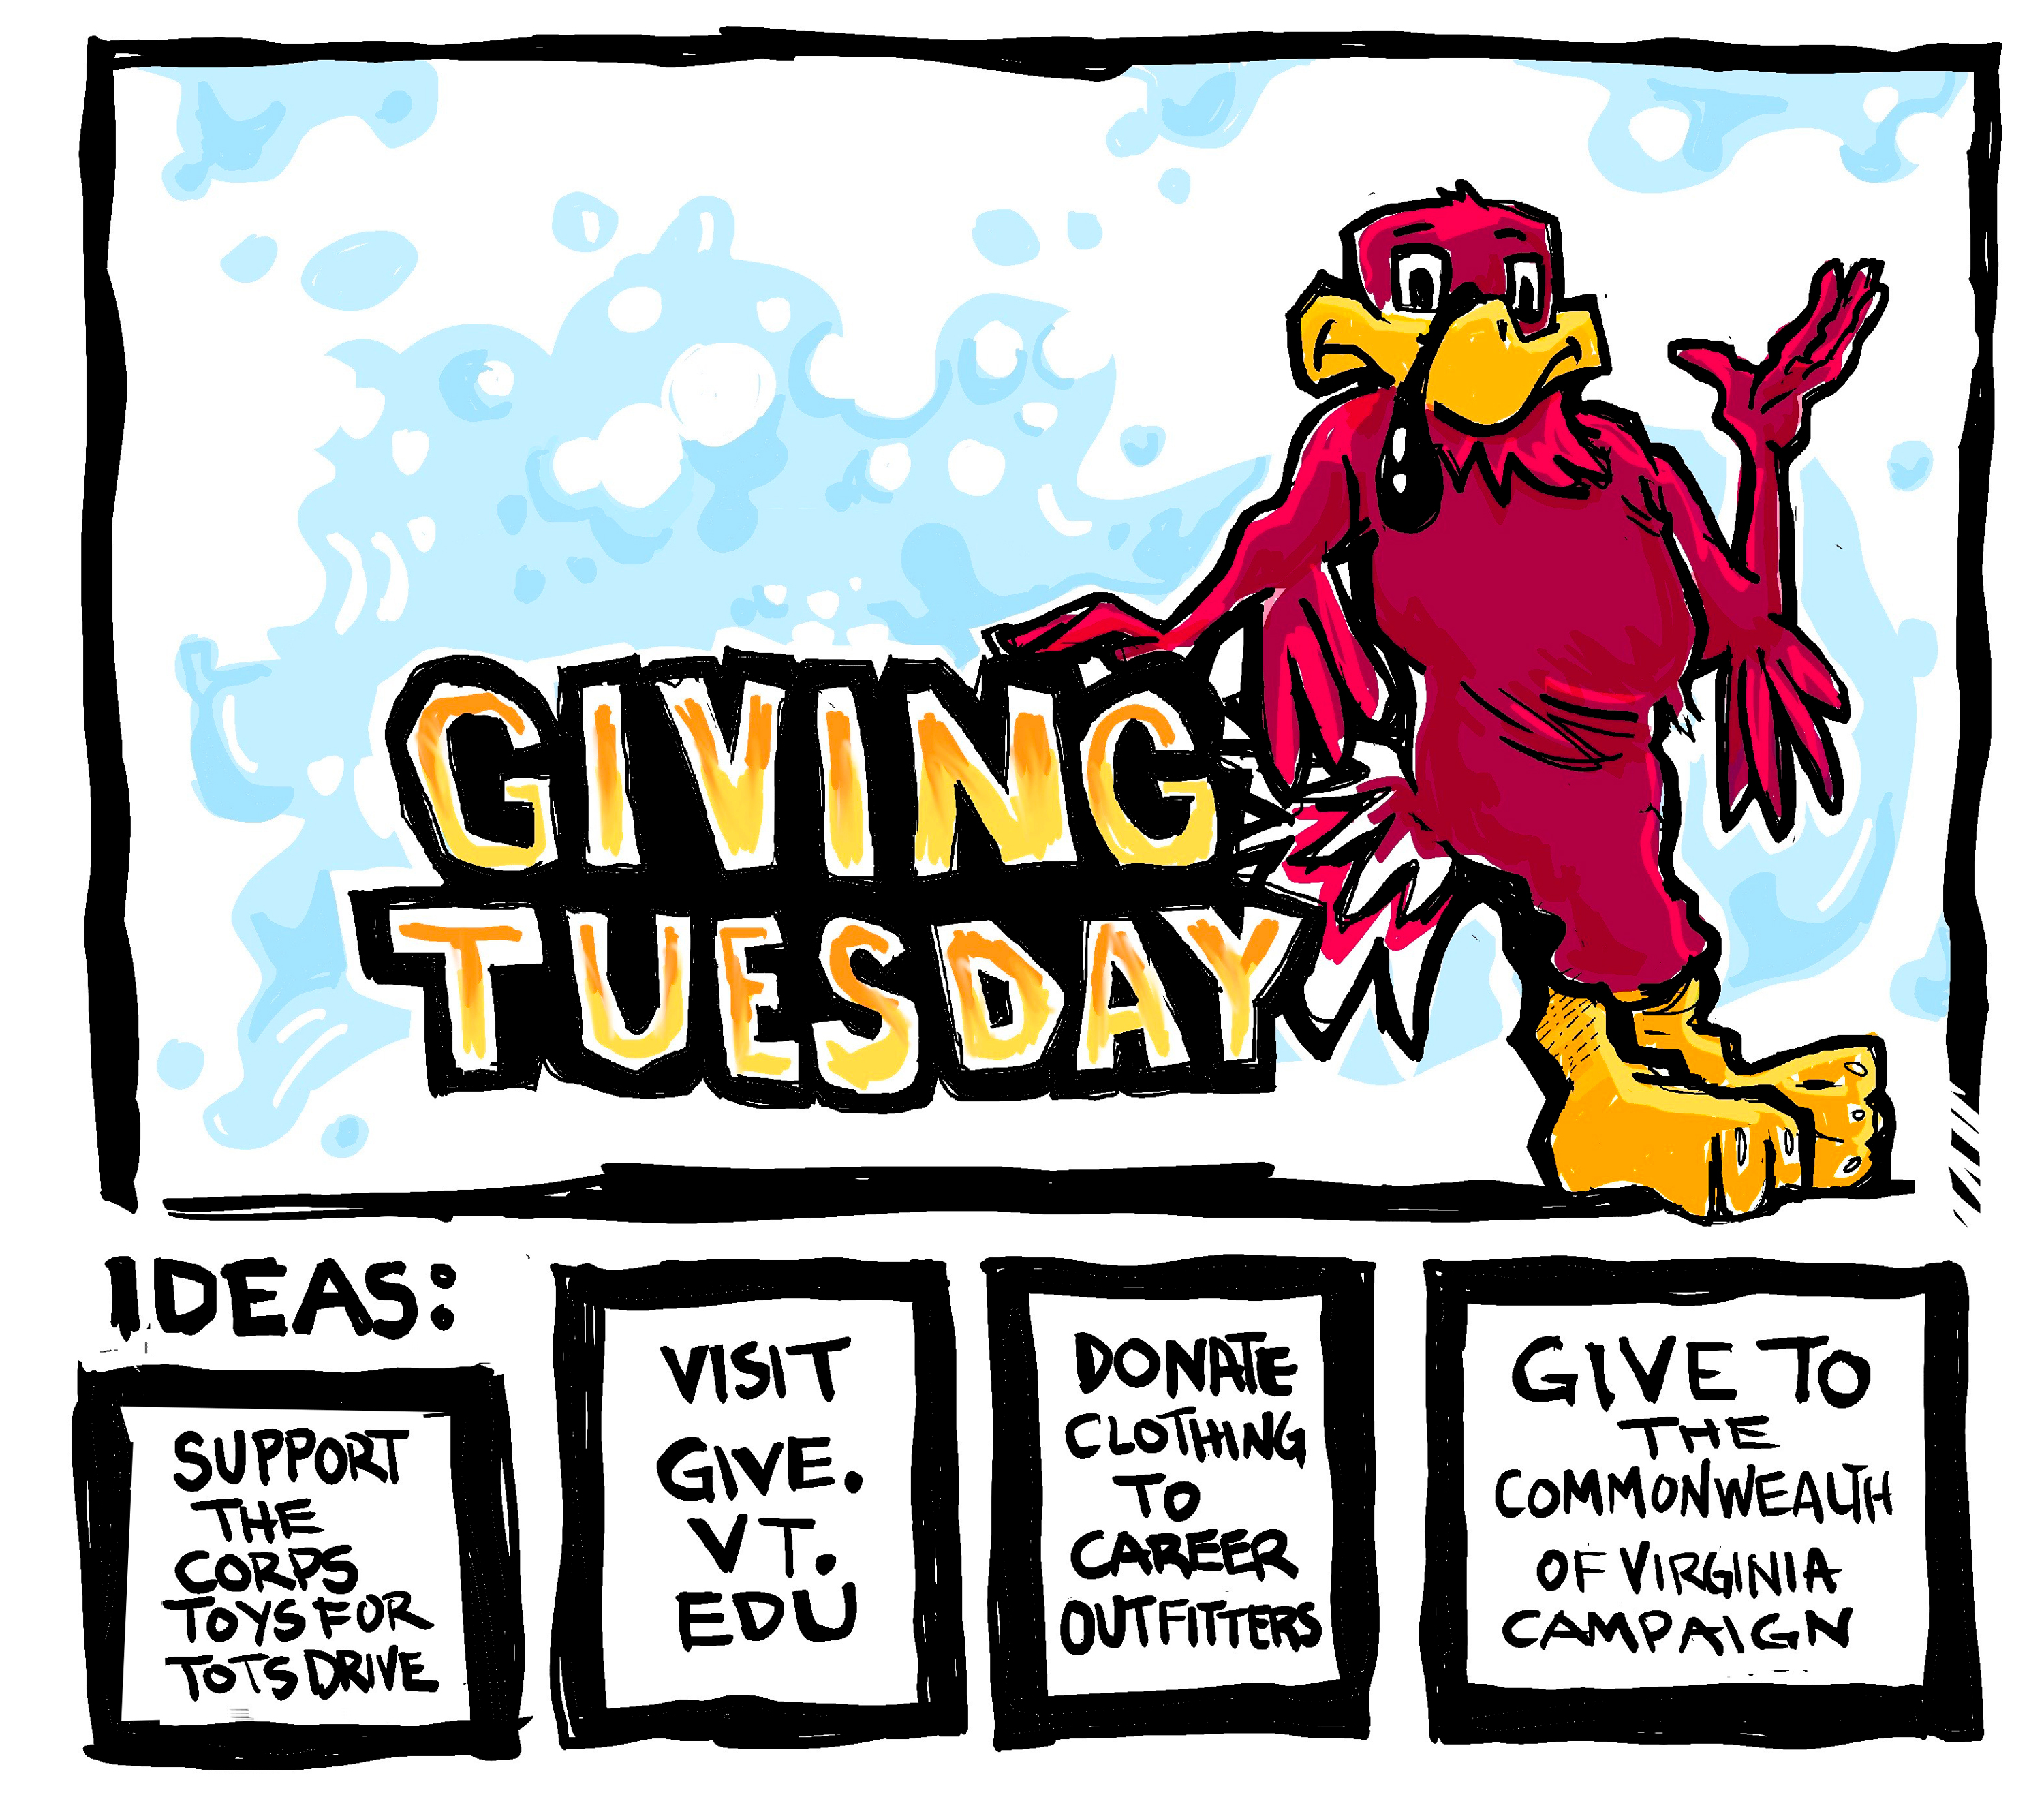 Digital sketch of the HokieBird with a Giving Tuesday letter block and some ideas for giving